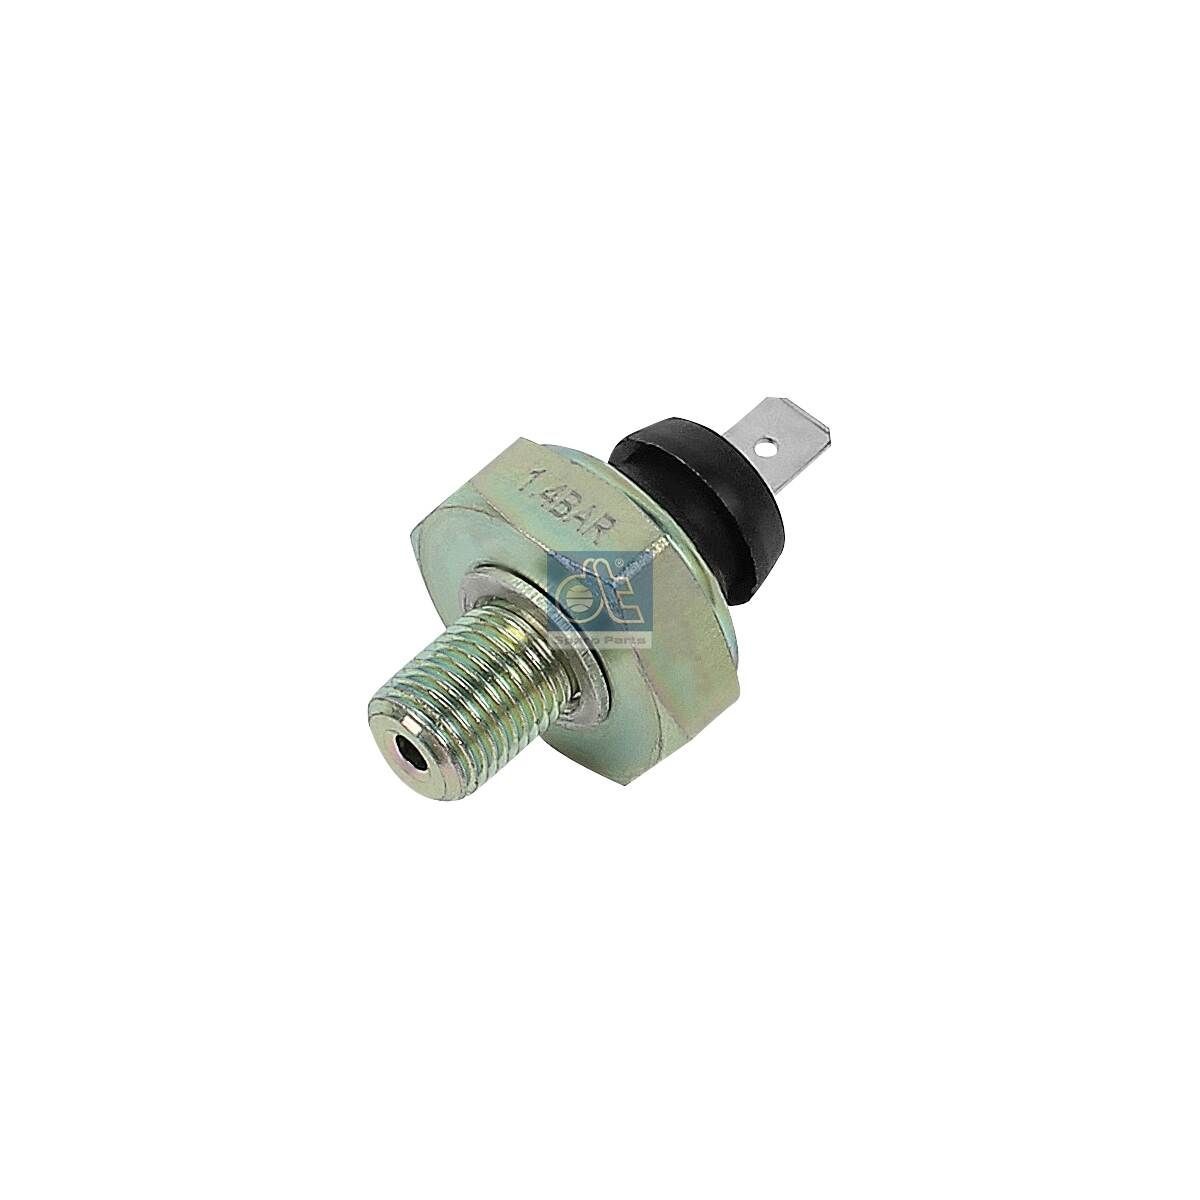 DT Spare Parts M10 x 1, 1,4 bar, 1,2 - 1,6 bar Oil Pressure Switch 11.80602 buy